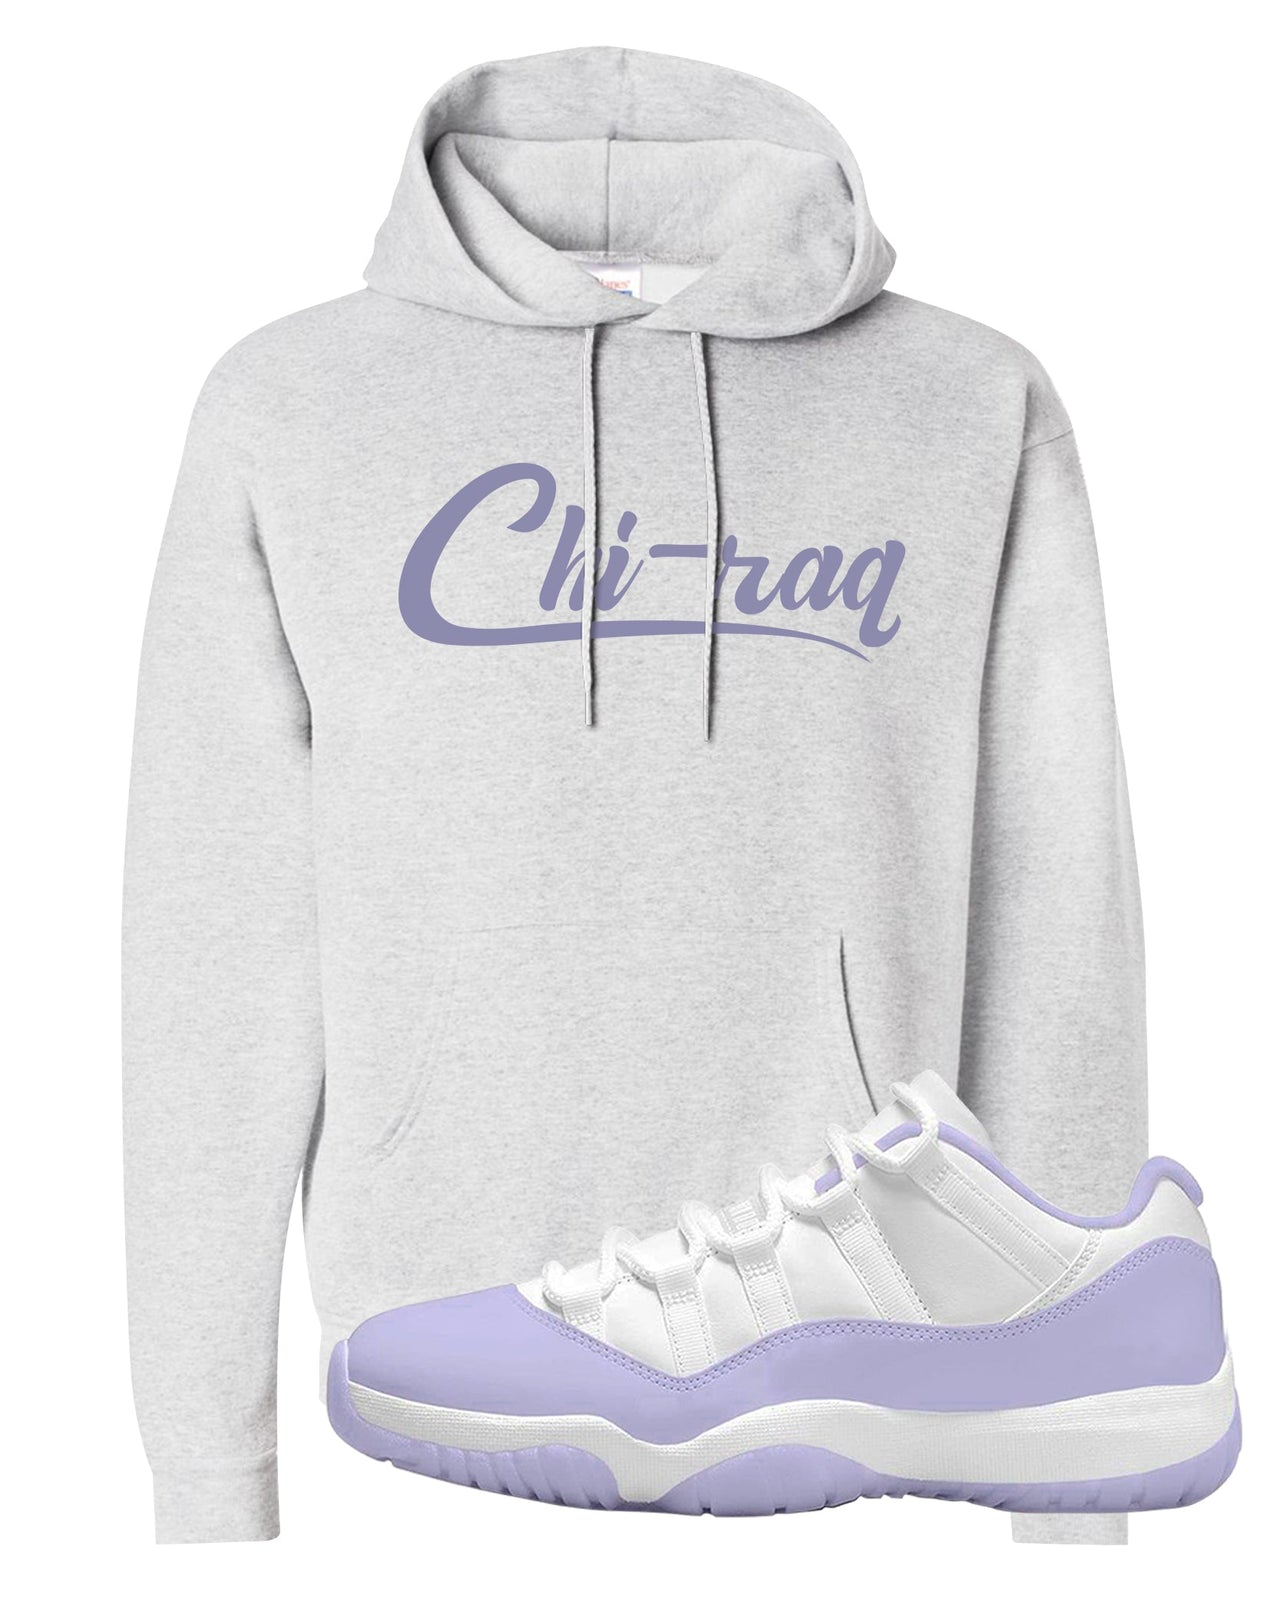 Pure Violet Low 11s Hoodie | Chiraq, Ash